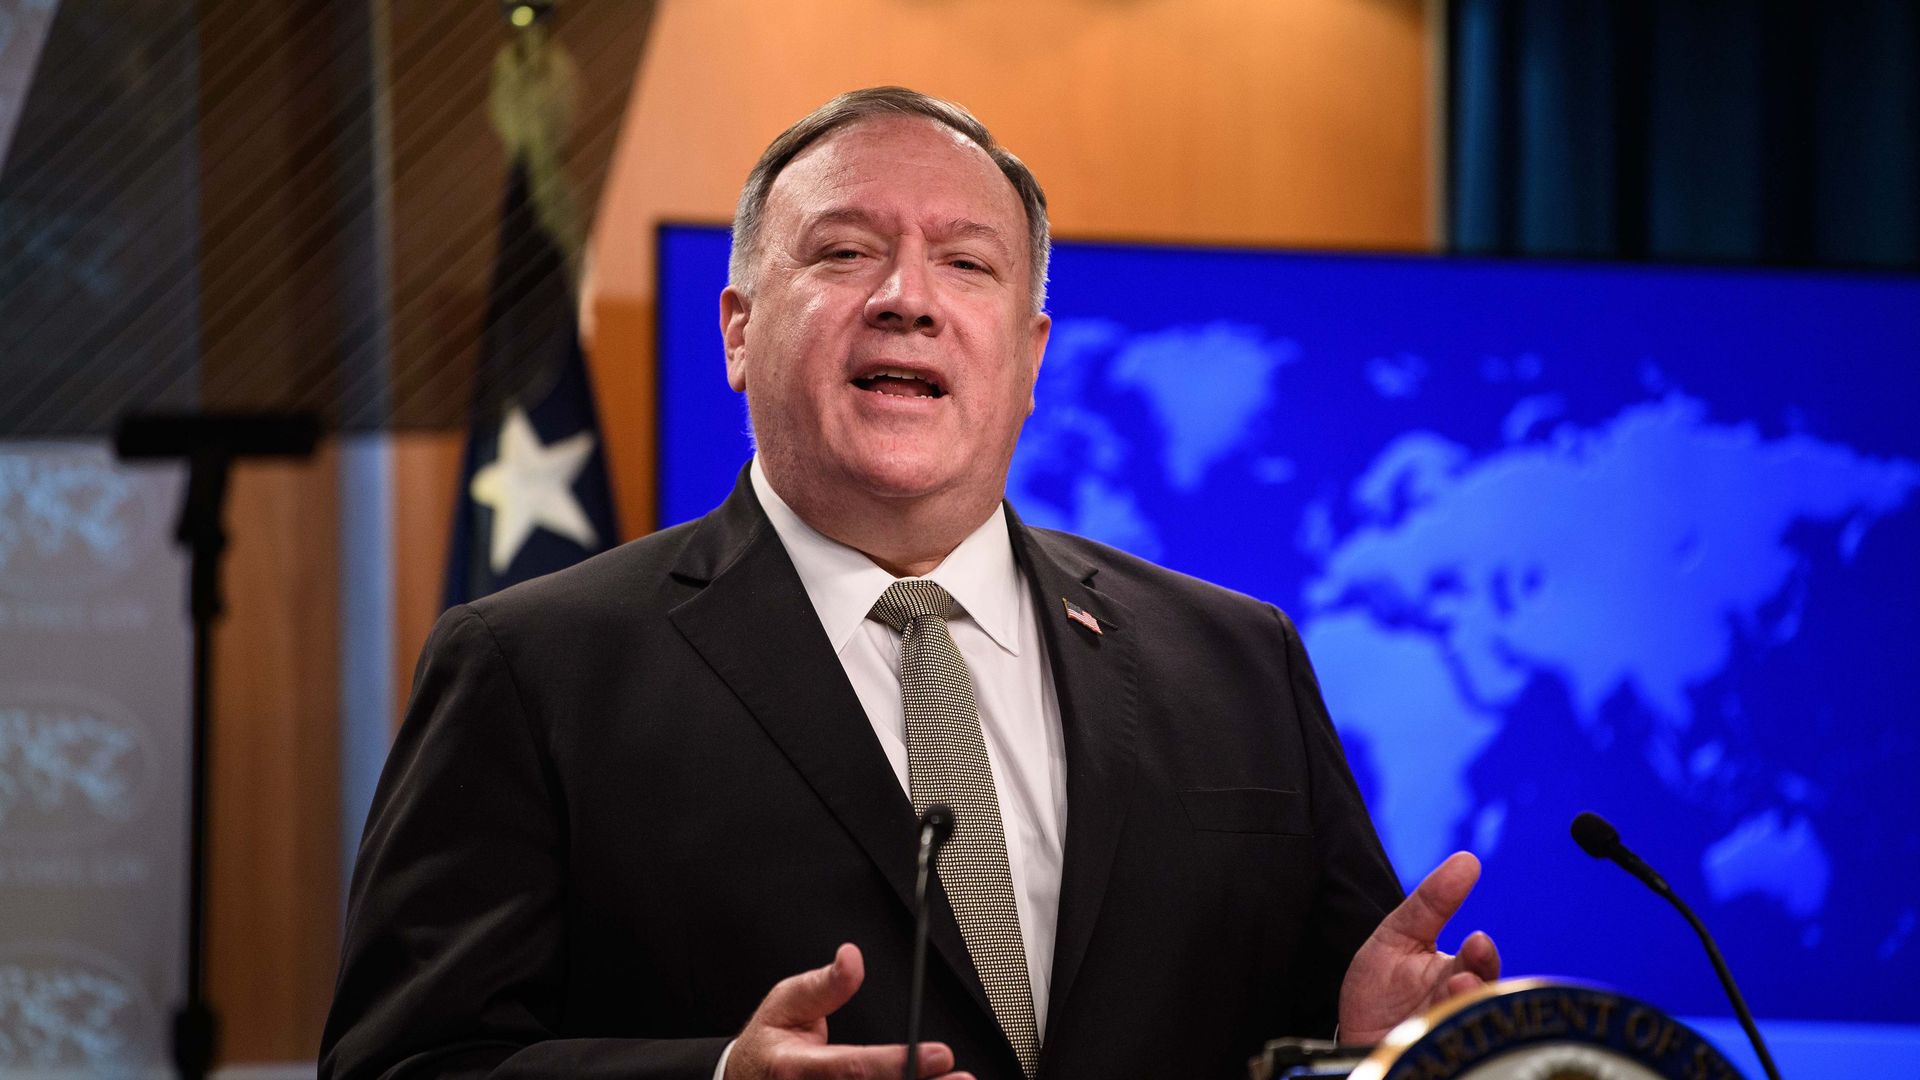 Secretary of State Mike Pompeo speaking in a press room